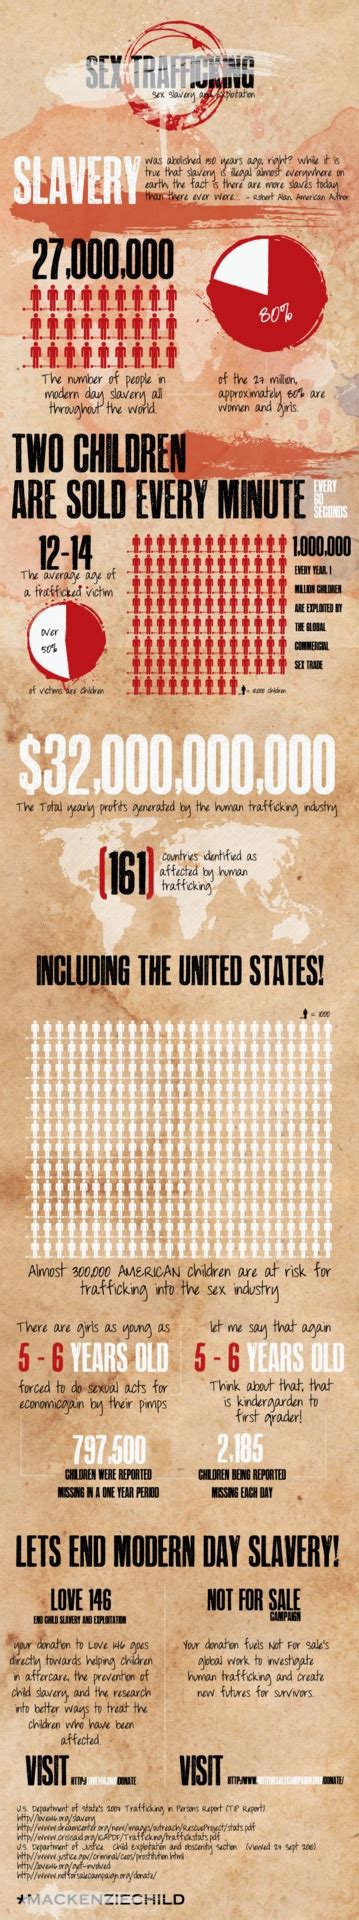 10 images about information on modern slavery aka an